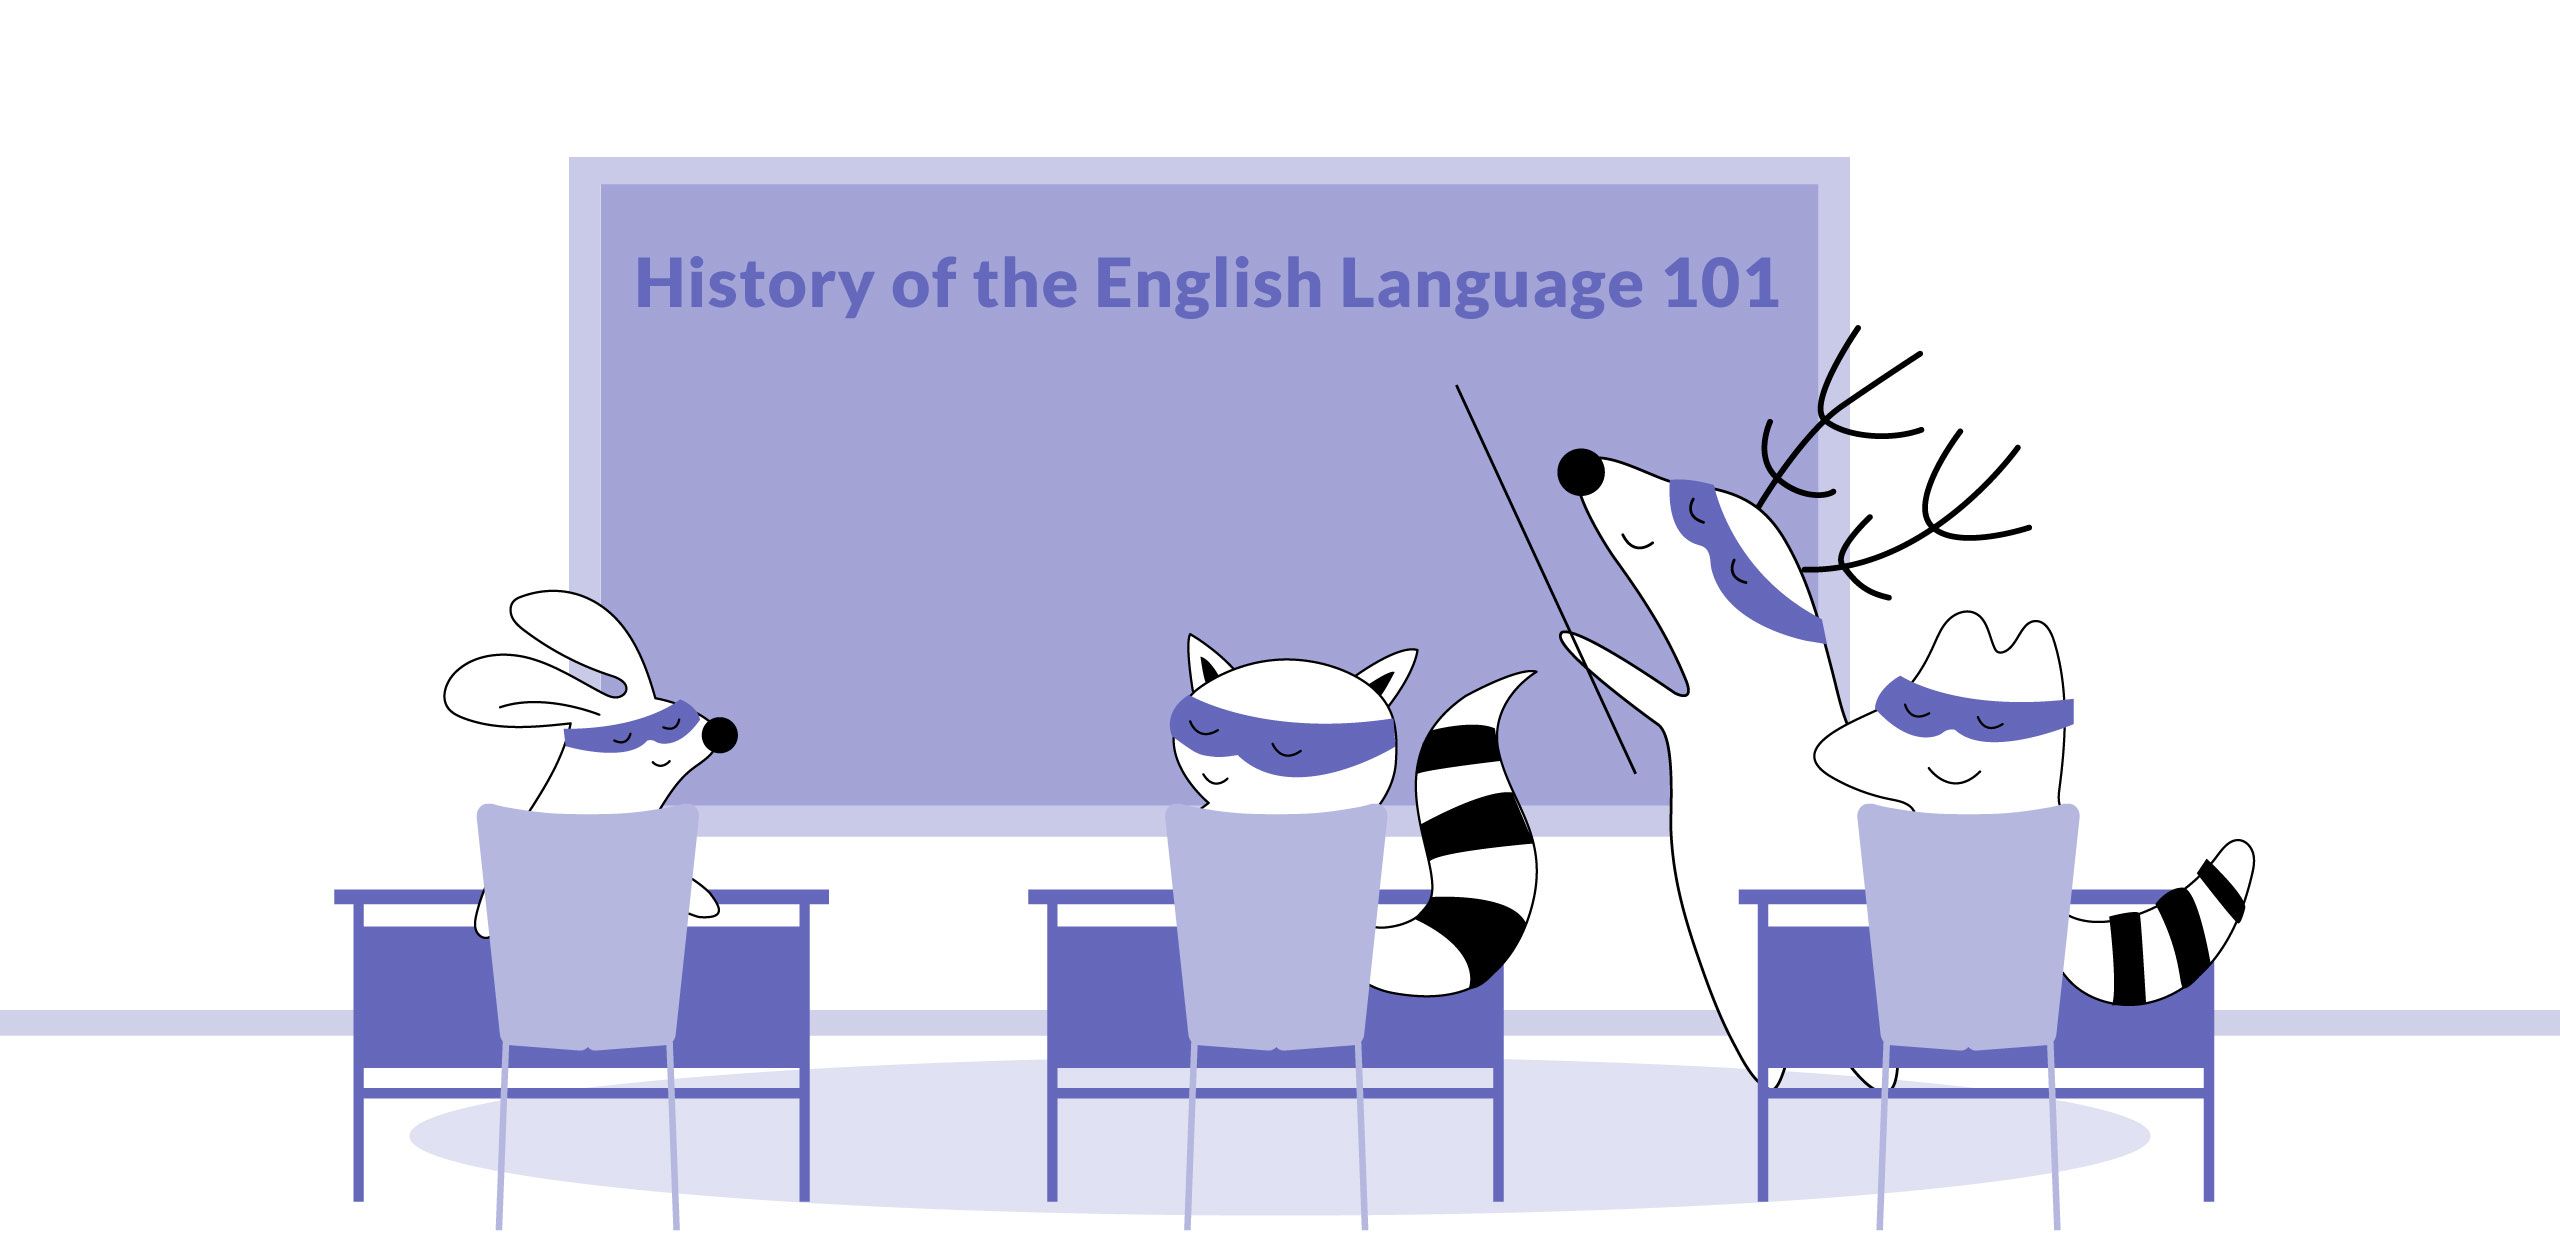 A Brief History of the English Language: From Old English to